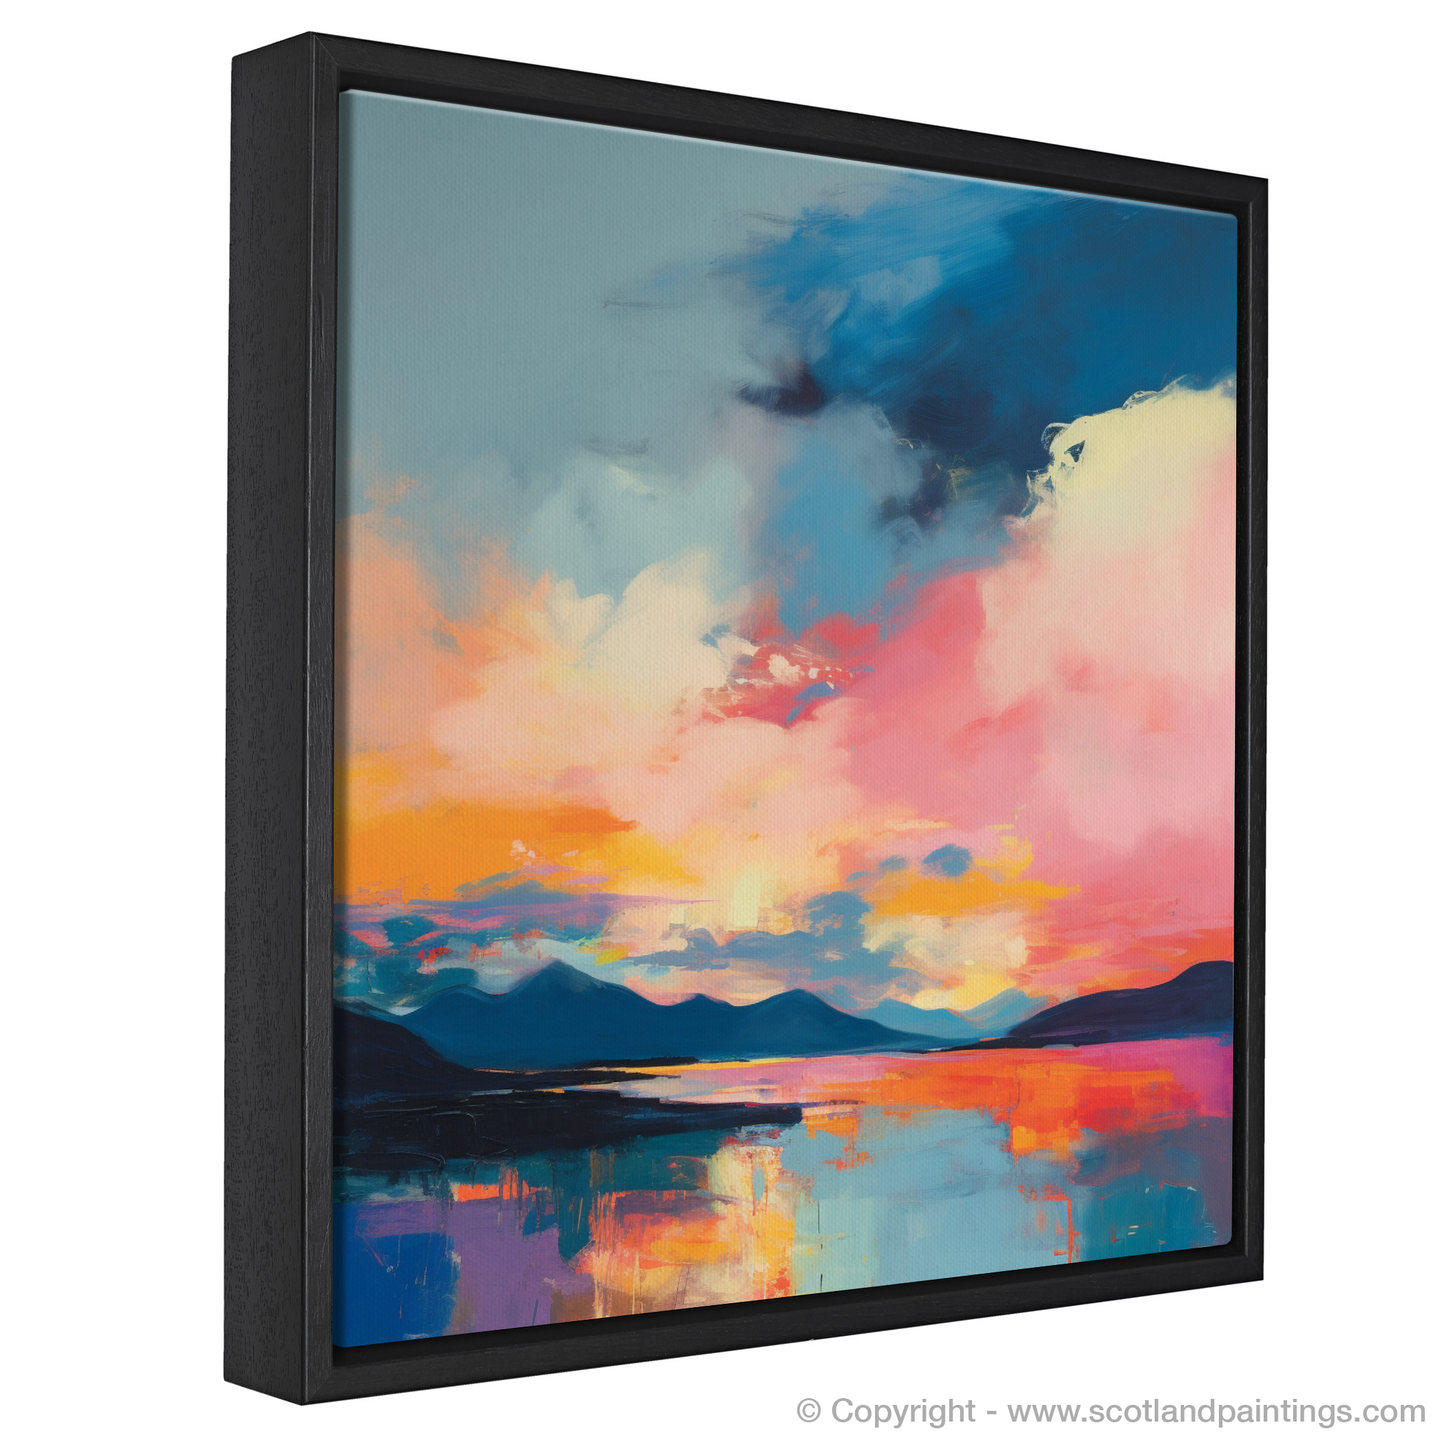 Painting and Art Print of A huge sky above Loch Lomond entitled "Twilight Reverie over Loch Lomond".